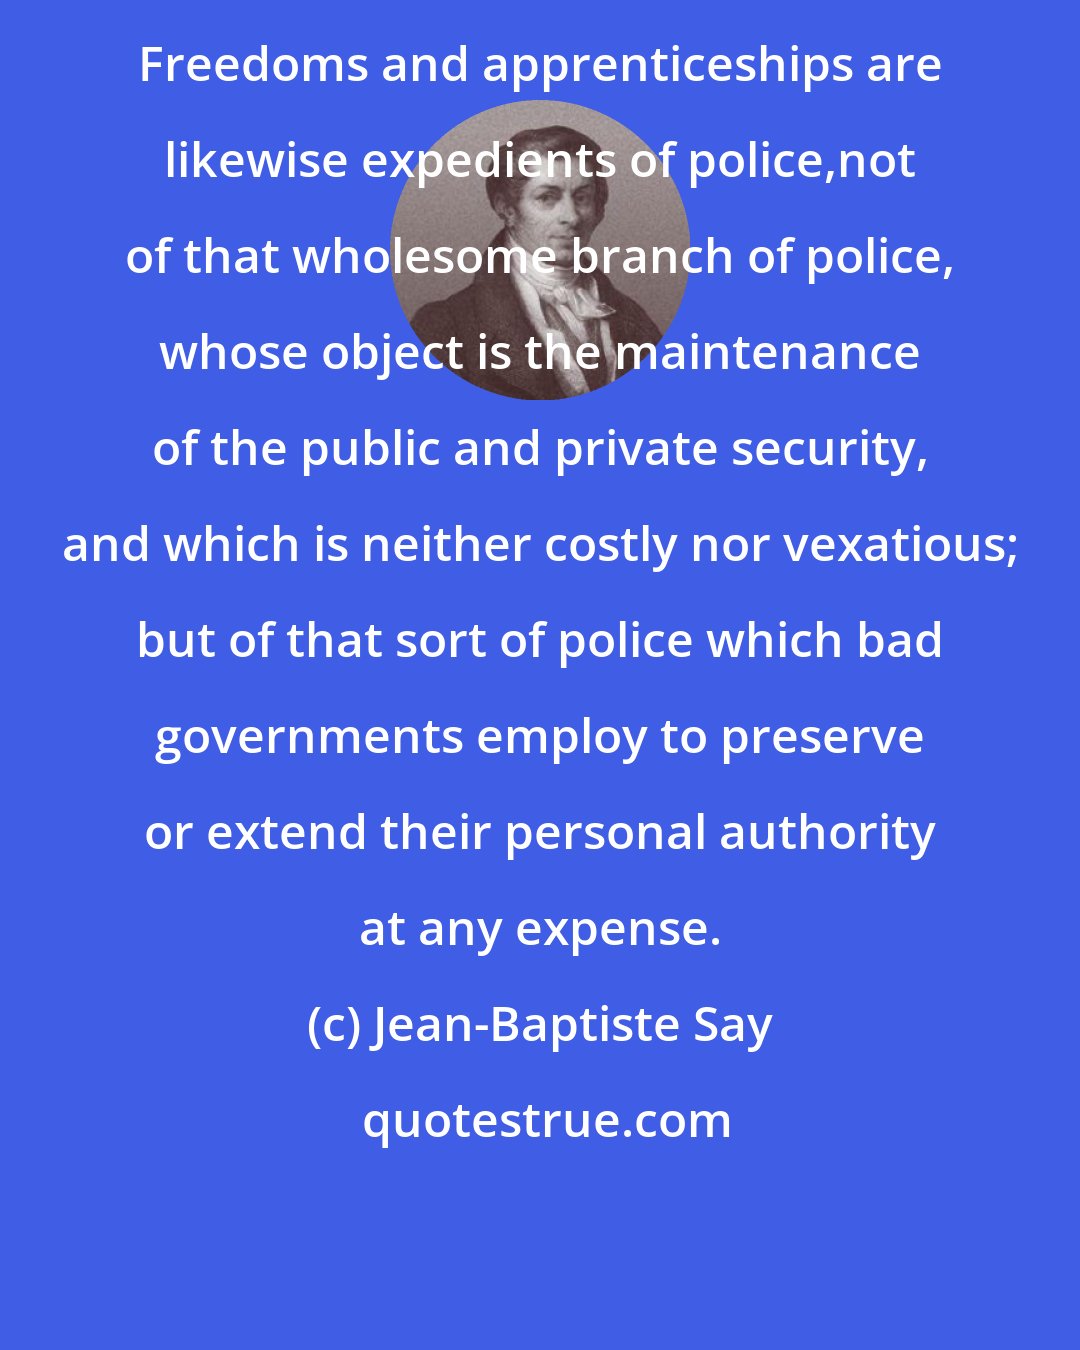 Jean-Baptiste Say: Freedoms and apprenticeships are likewise expedients of police,not of that wholesome branch of police, whose object is the maintenance of the public and private security, and which is neither costly nor vexatious; but of that sort of police which bad governments employ to preserve or extend their personal authority at any expense.